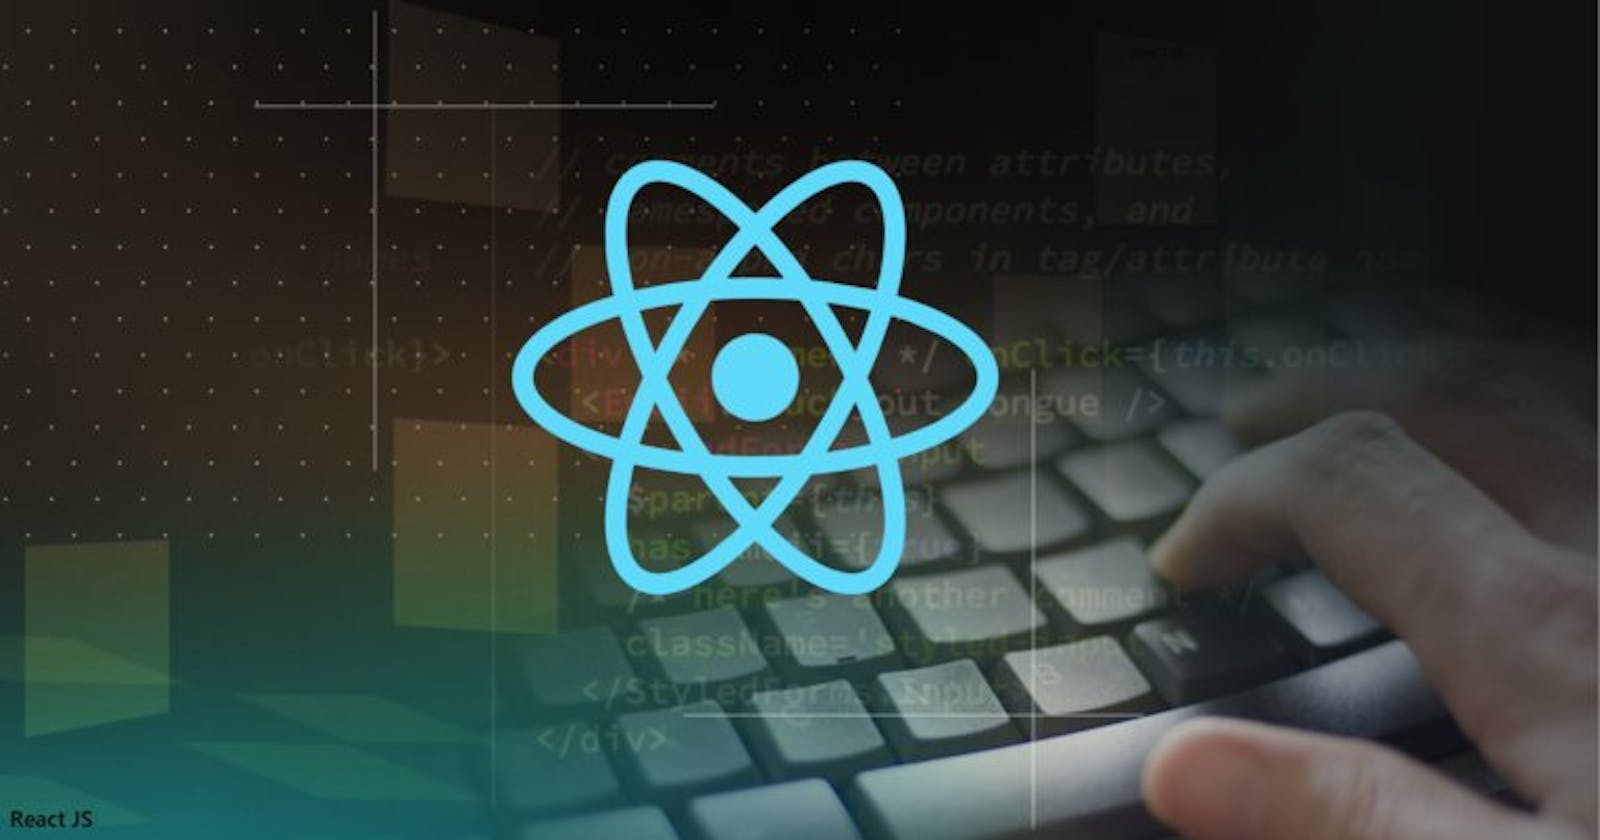 What is React.js?